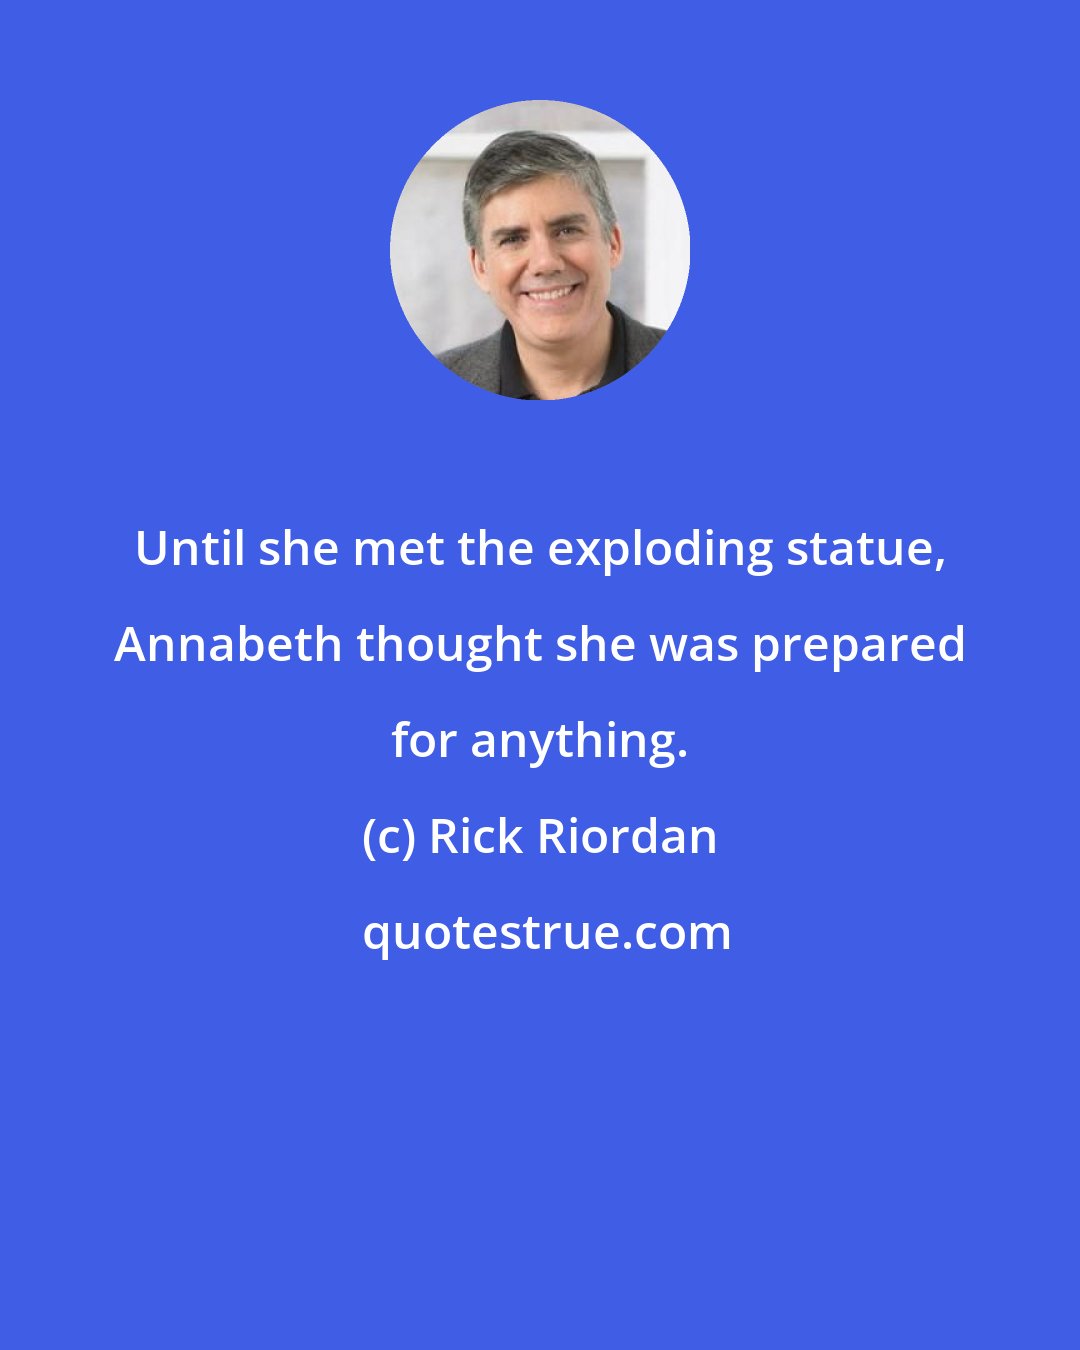 Rick Riordan: Until she met the exploding statue, Annabeth thought she was prepared for anything.